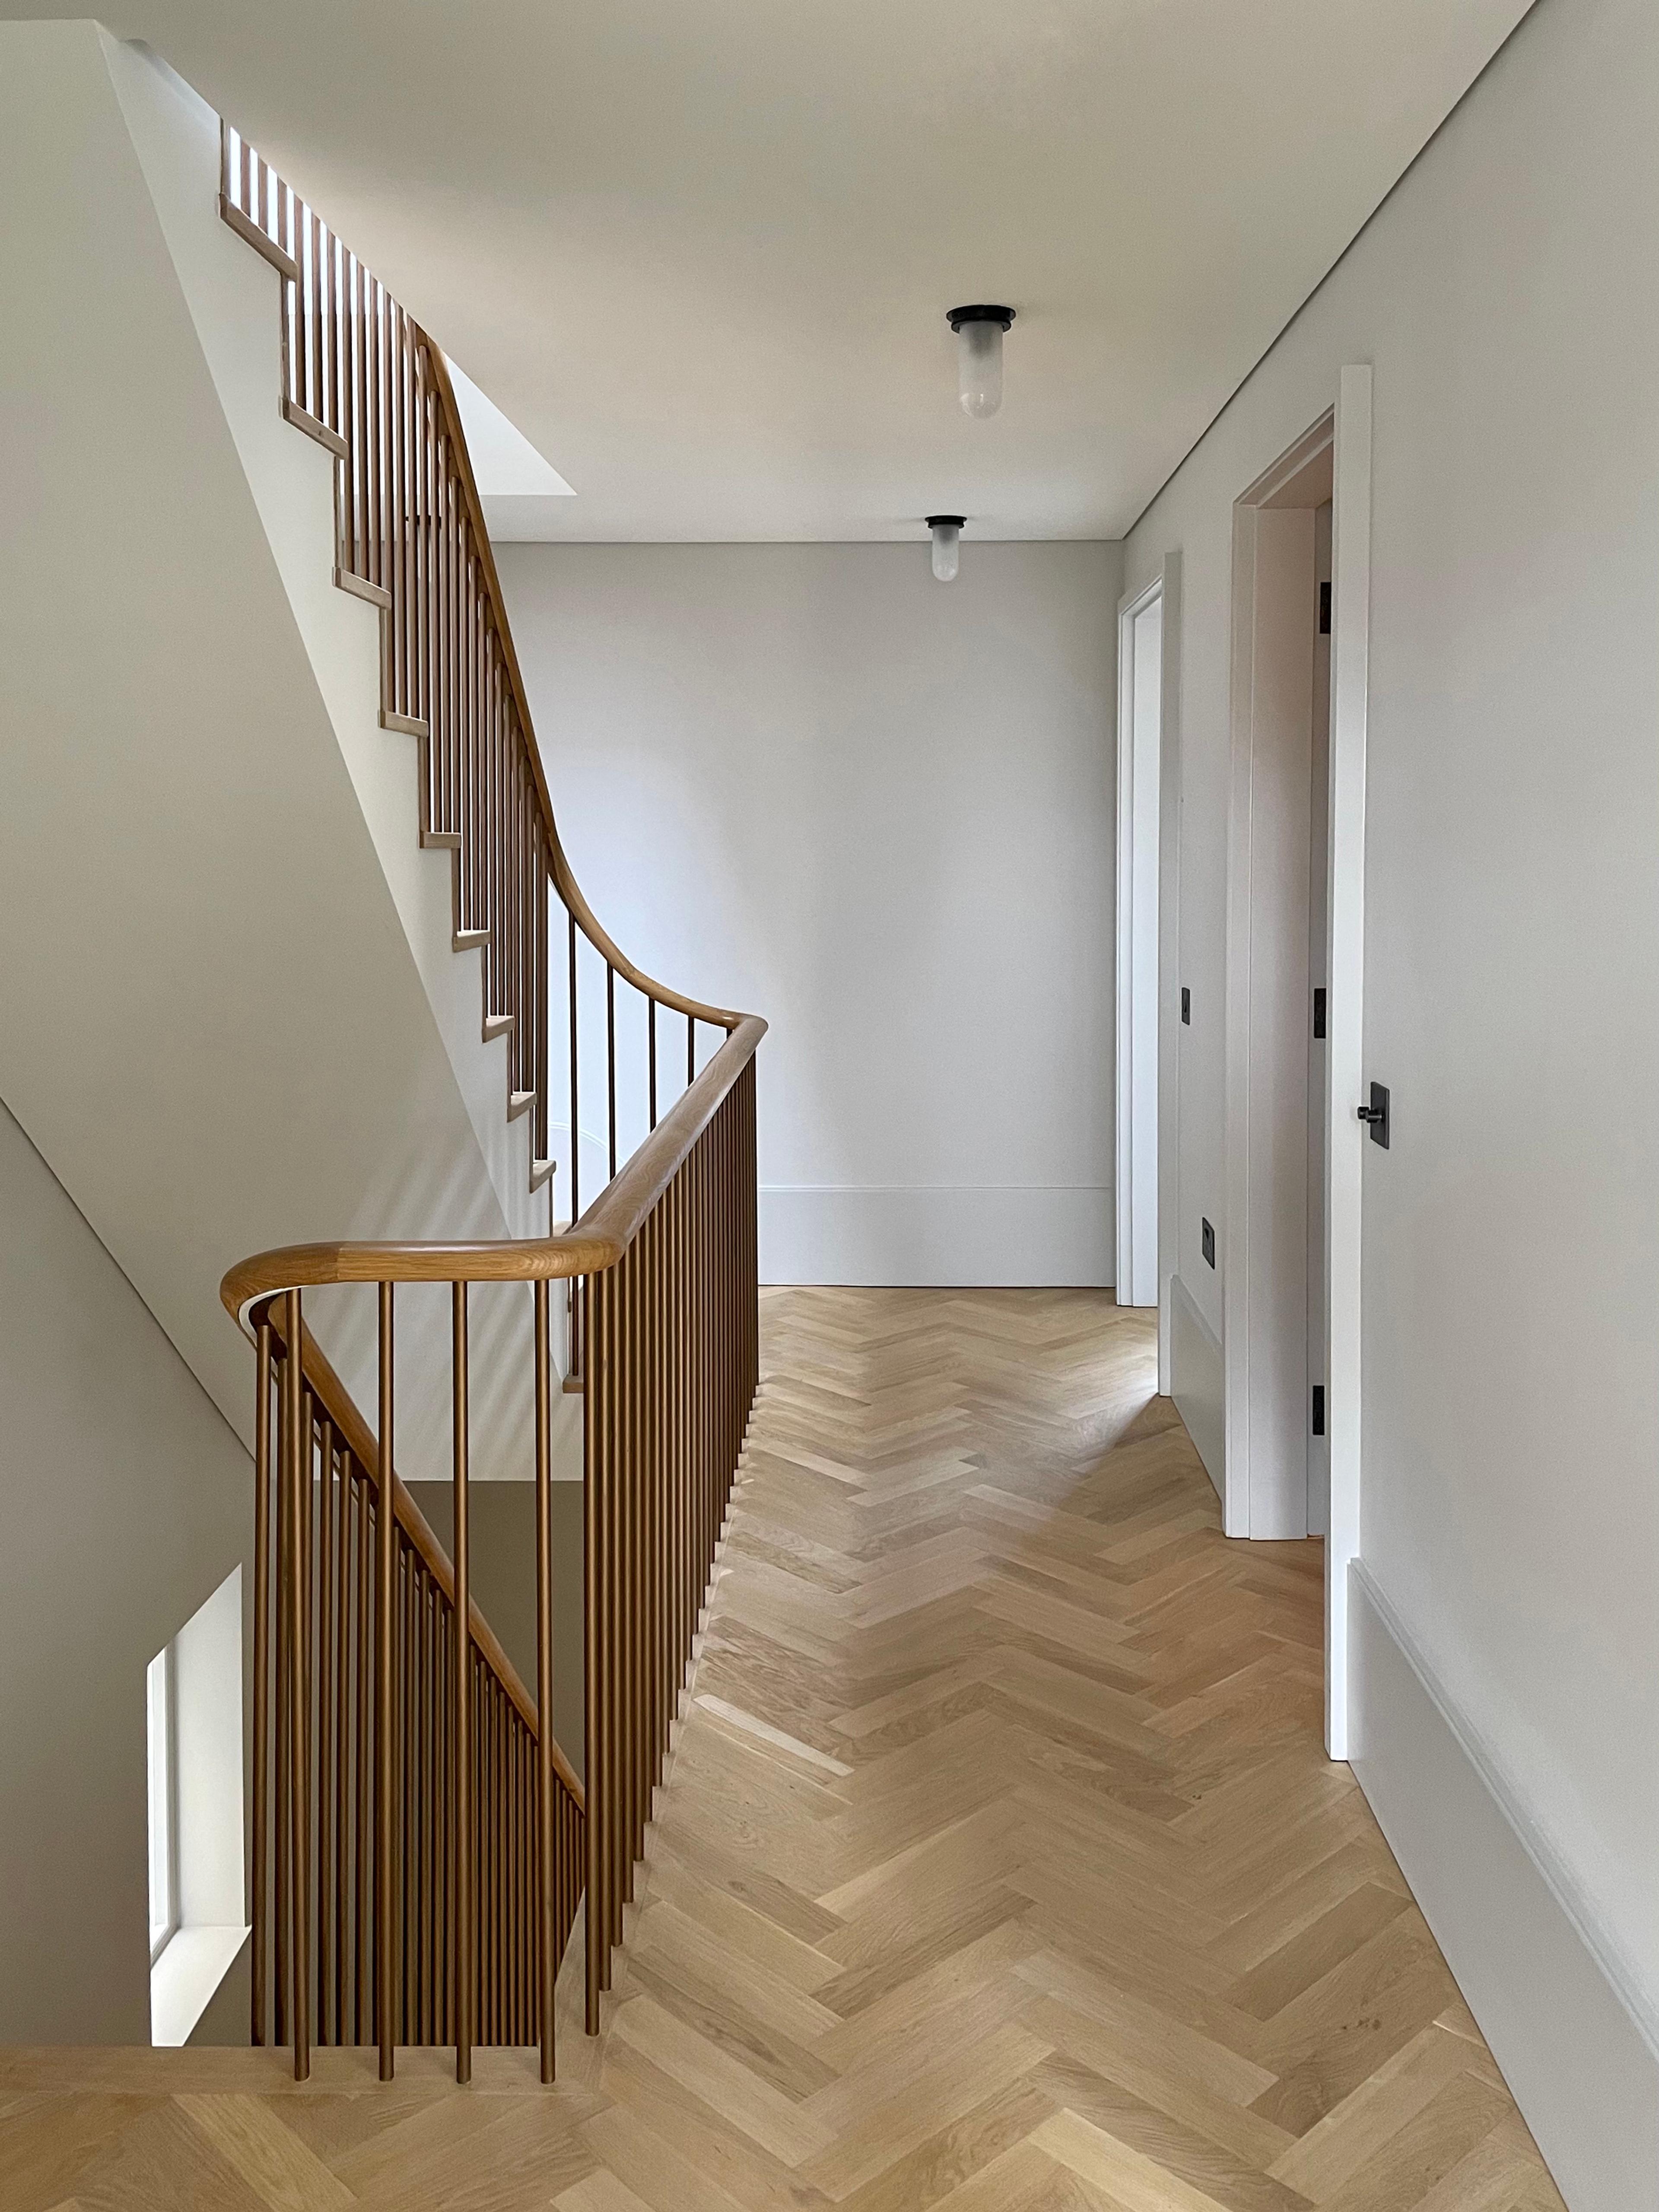 A new staircase connects all six storeys